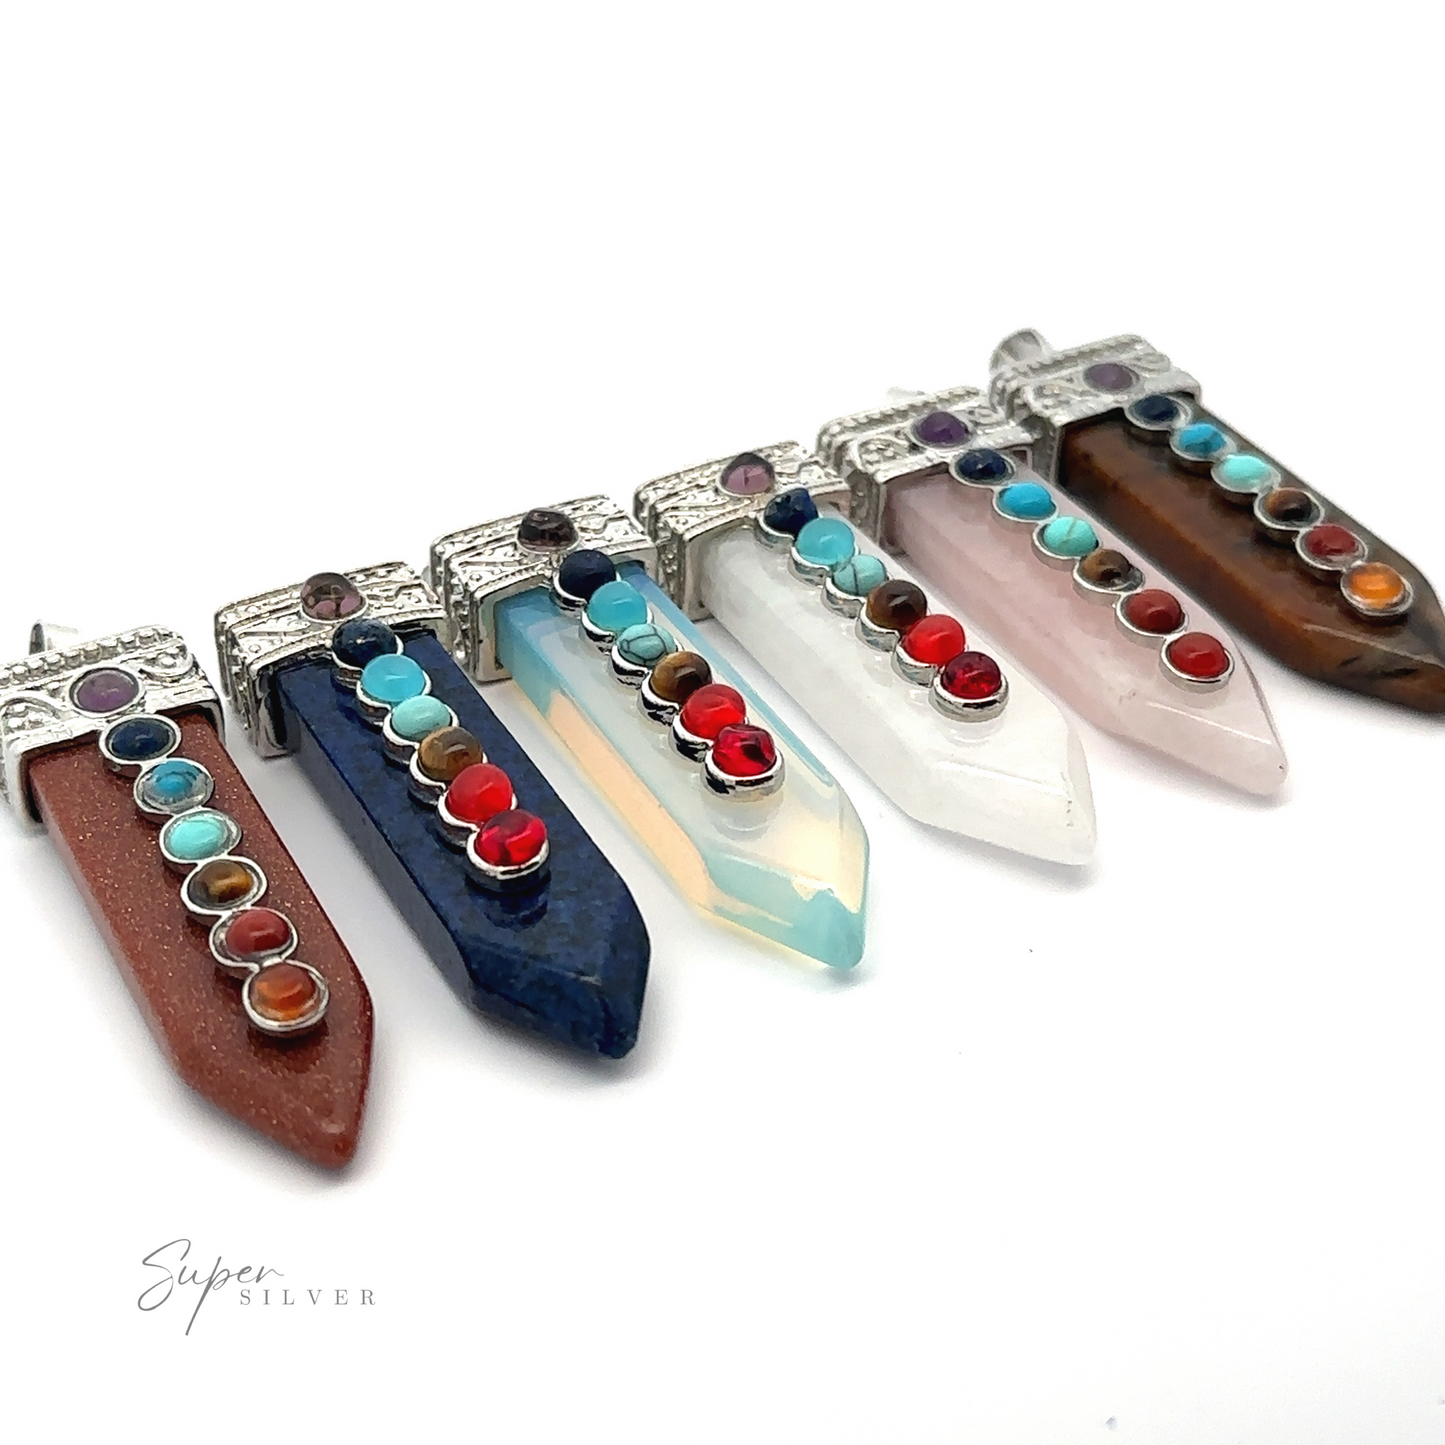 
                  
                    A row of six Obelisk Crystal Pendants with Small Chakra Stones with silver caps, each featuring round colorful stones. The gemstones, which could double as chakra stones, include brown, blue, white, pink, and striped varieties, arranged side by side on a white background.
                  
                